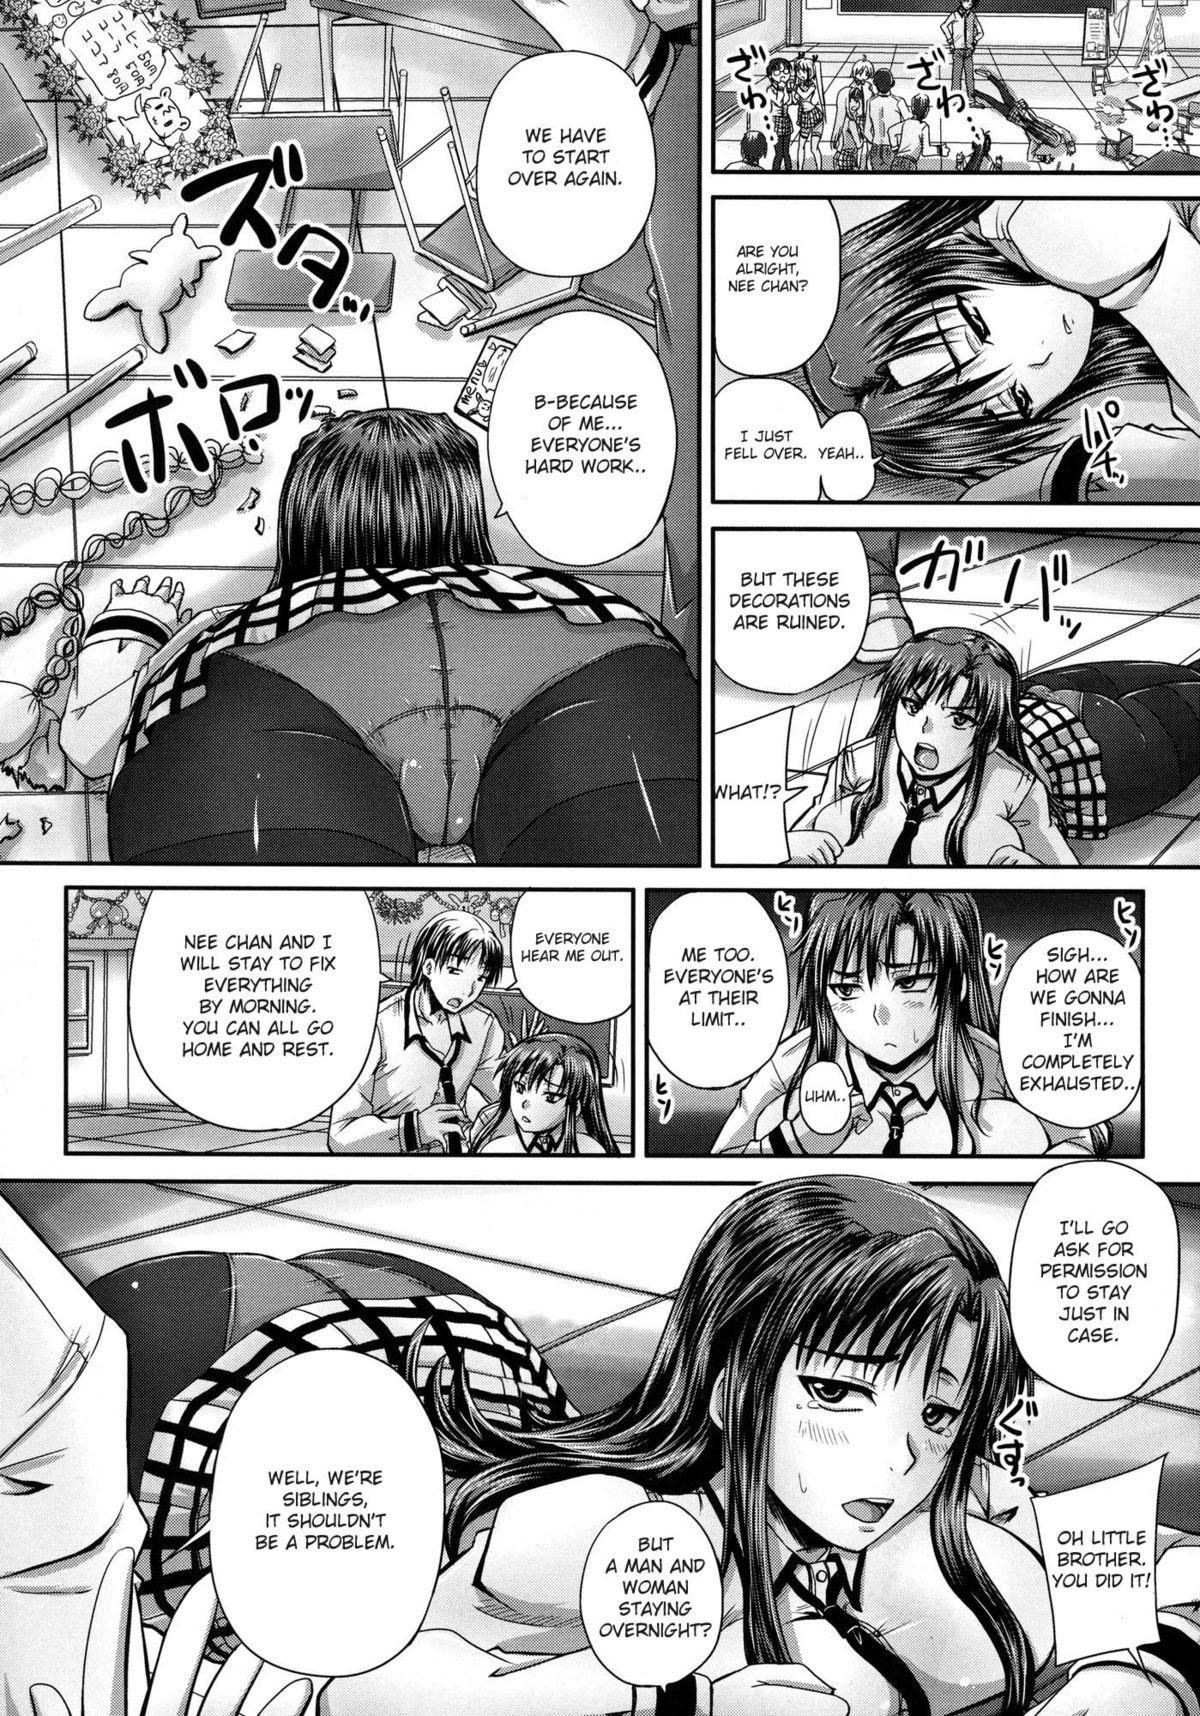 Hot Whores [Akigami Satoru] Tsukurou! Onaho Ane - Let's made a Sex Sleeve from Sister Ch. 1-2 [English] [snowshoes] Sexcams - Page 10